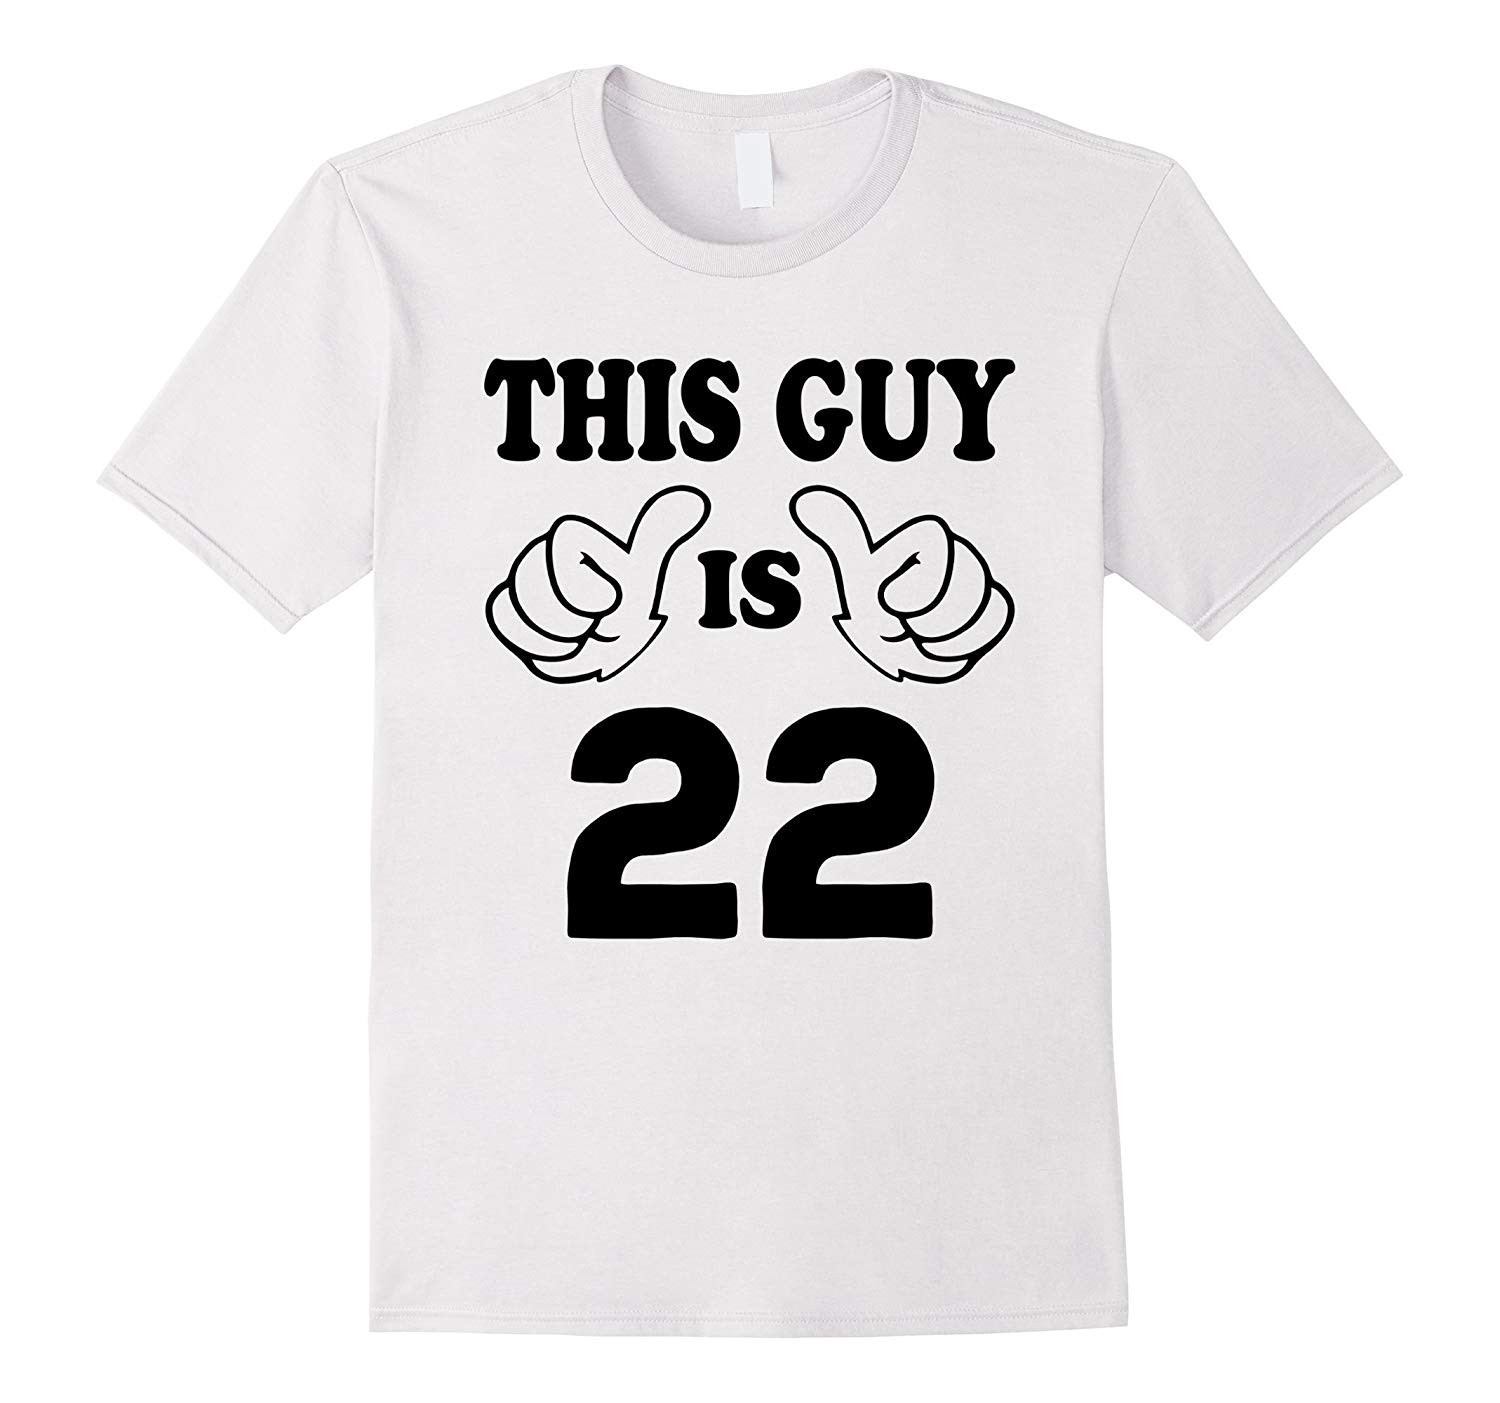 22 Year Old Birthday Gift Ideas
 This Guy is twenty two 22 Years Old 22nd Birthday Gift